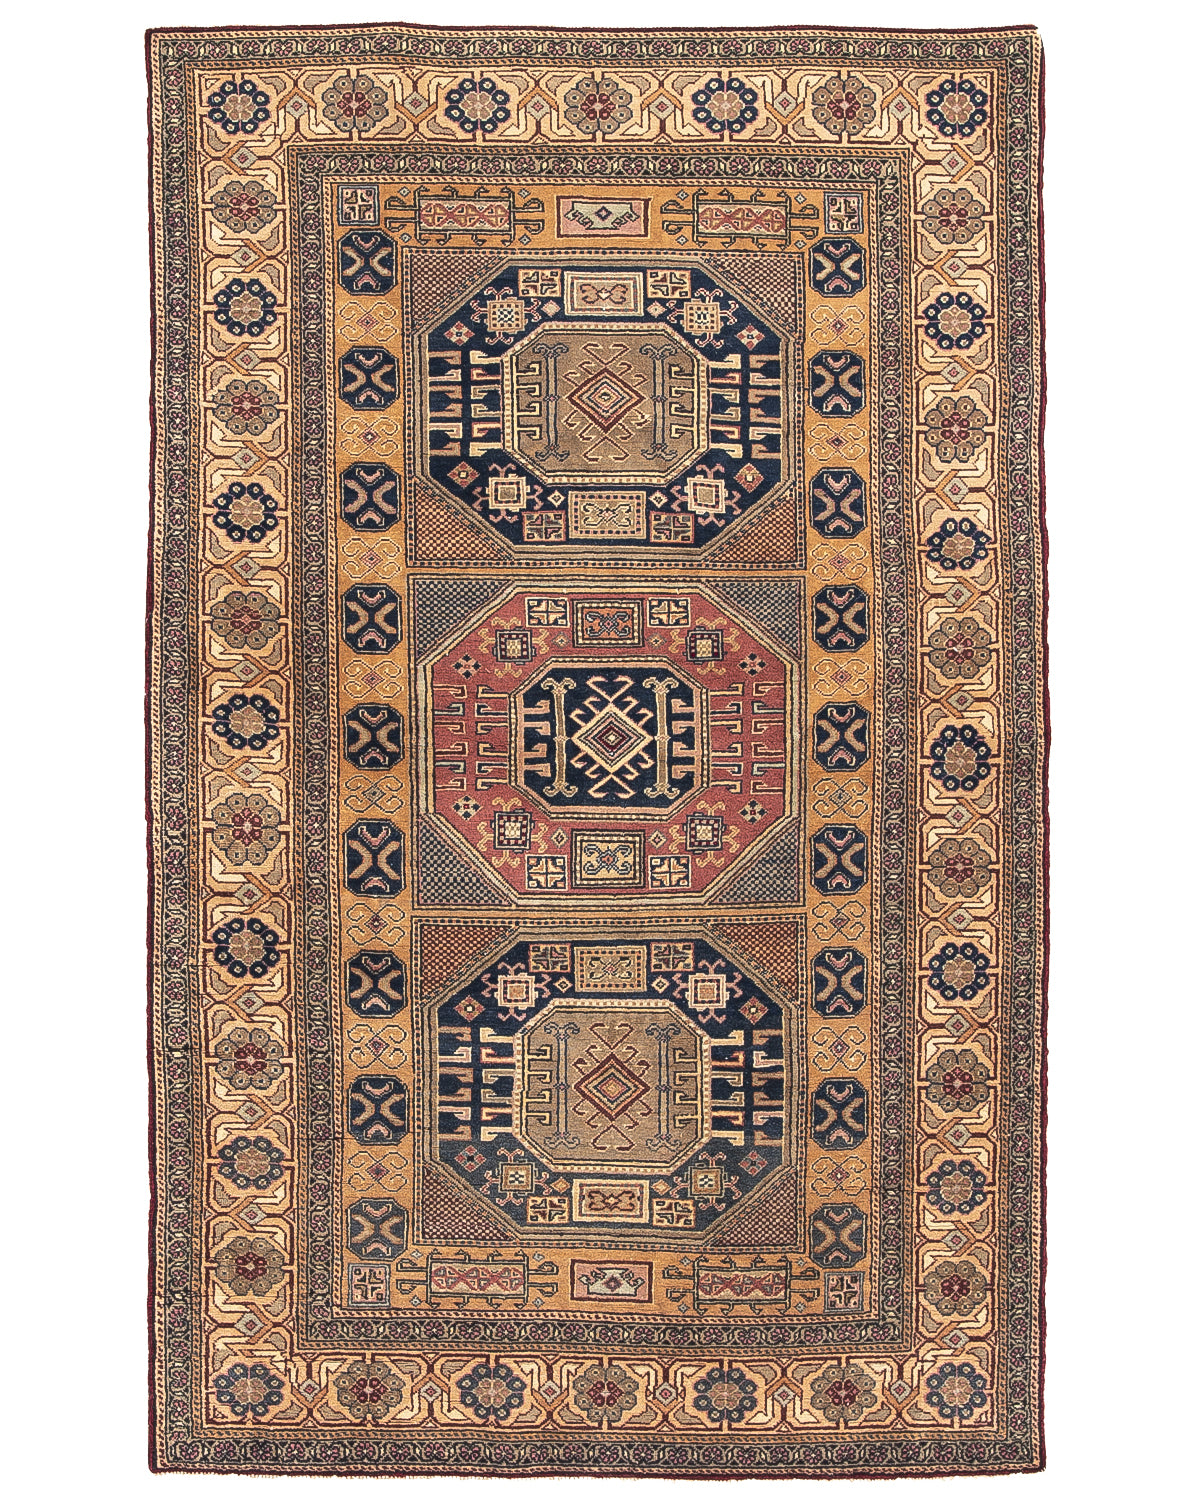 Oriental Rug Anatolian Hand Knotted Wool On Cotton 120 X 187 Cm - 4' X 6' 2'' Brown C005 ER01